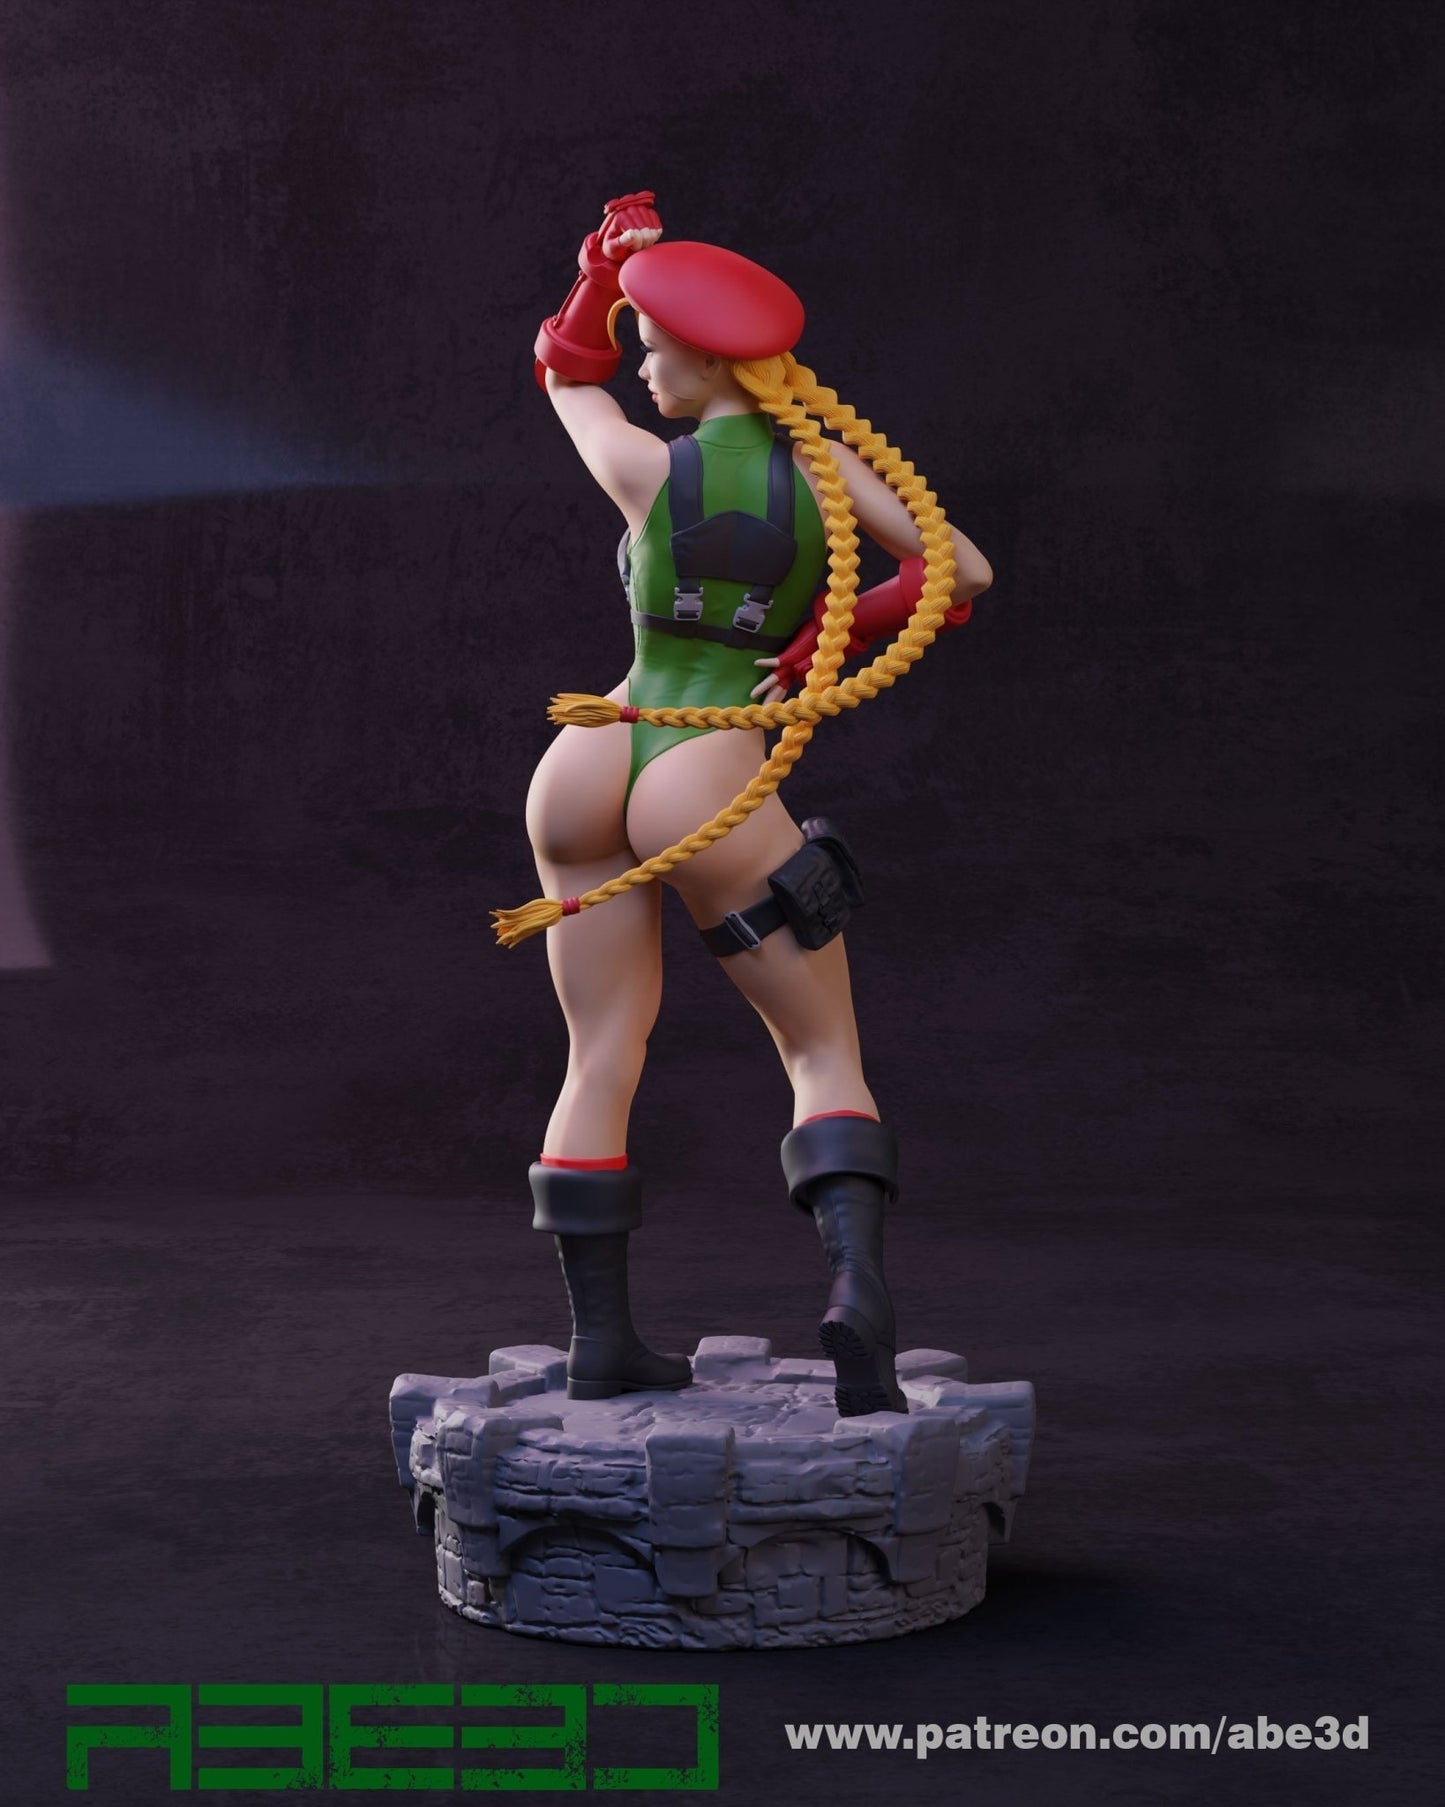 CAMMY 2 3D Printed Miniature FunArt Collectable by Abe3d